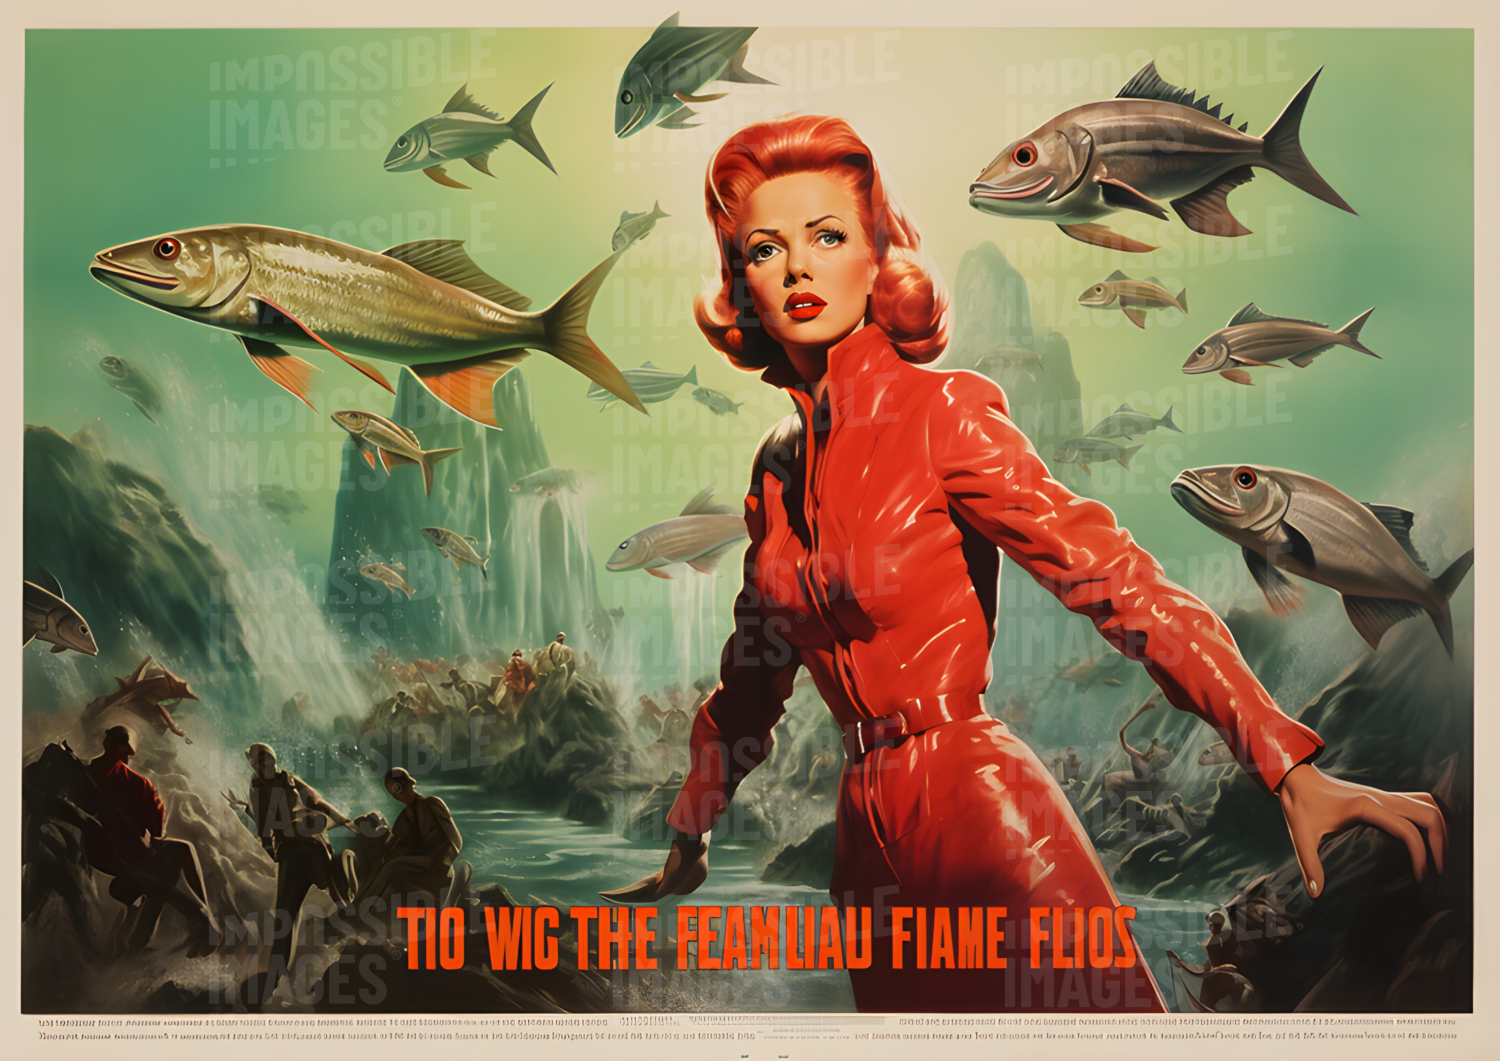 1950s style sci-fi movie poster showing a young heroine in a red plastic overall exploring an undersea world - 